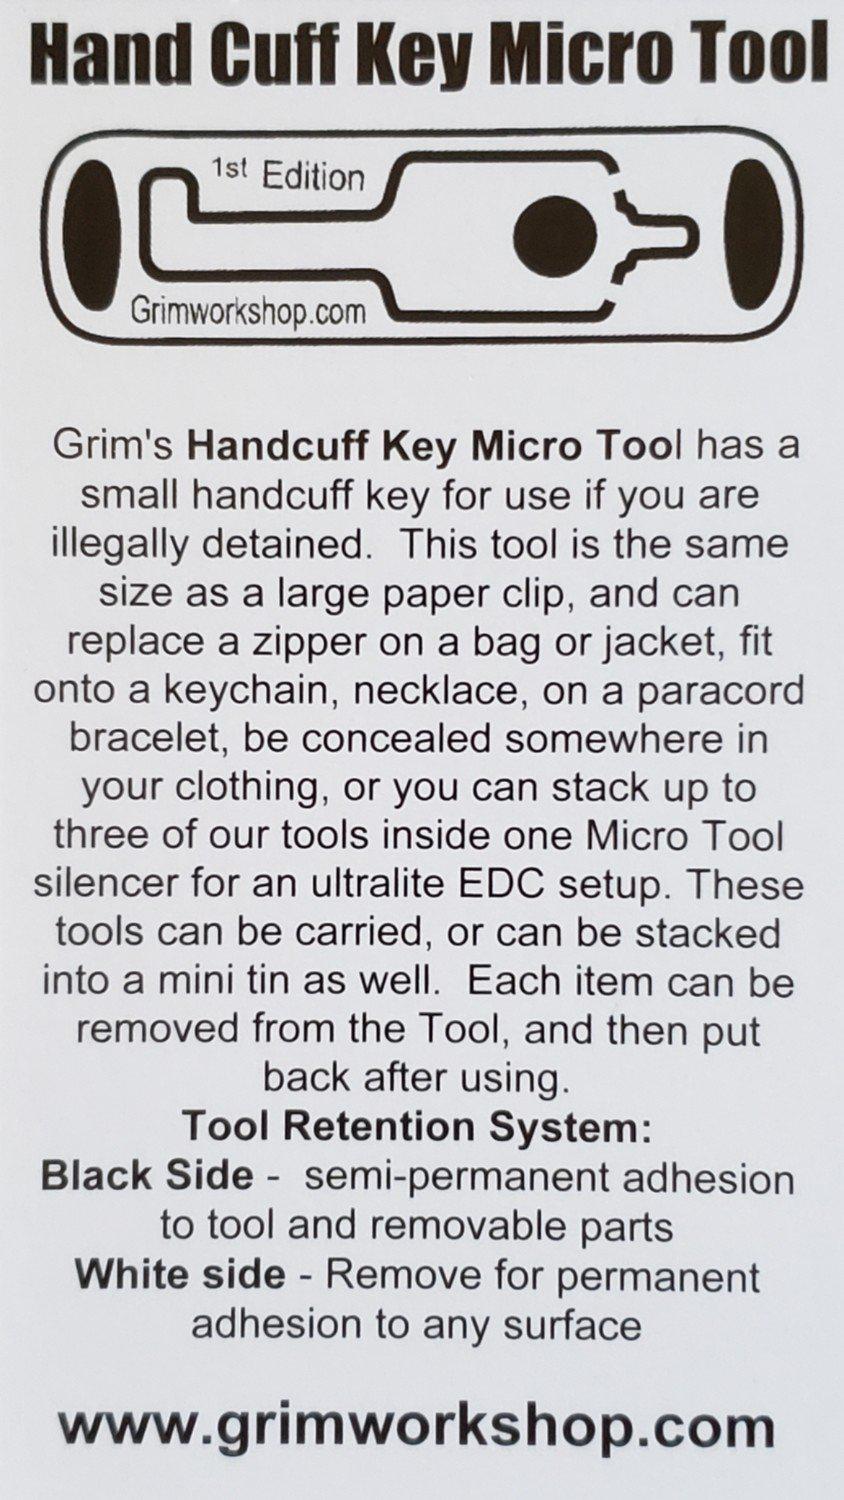 You NEED this if you carry a lot of keys!